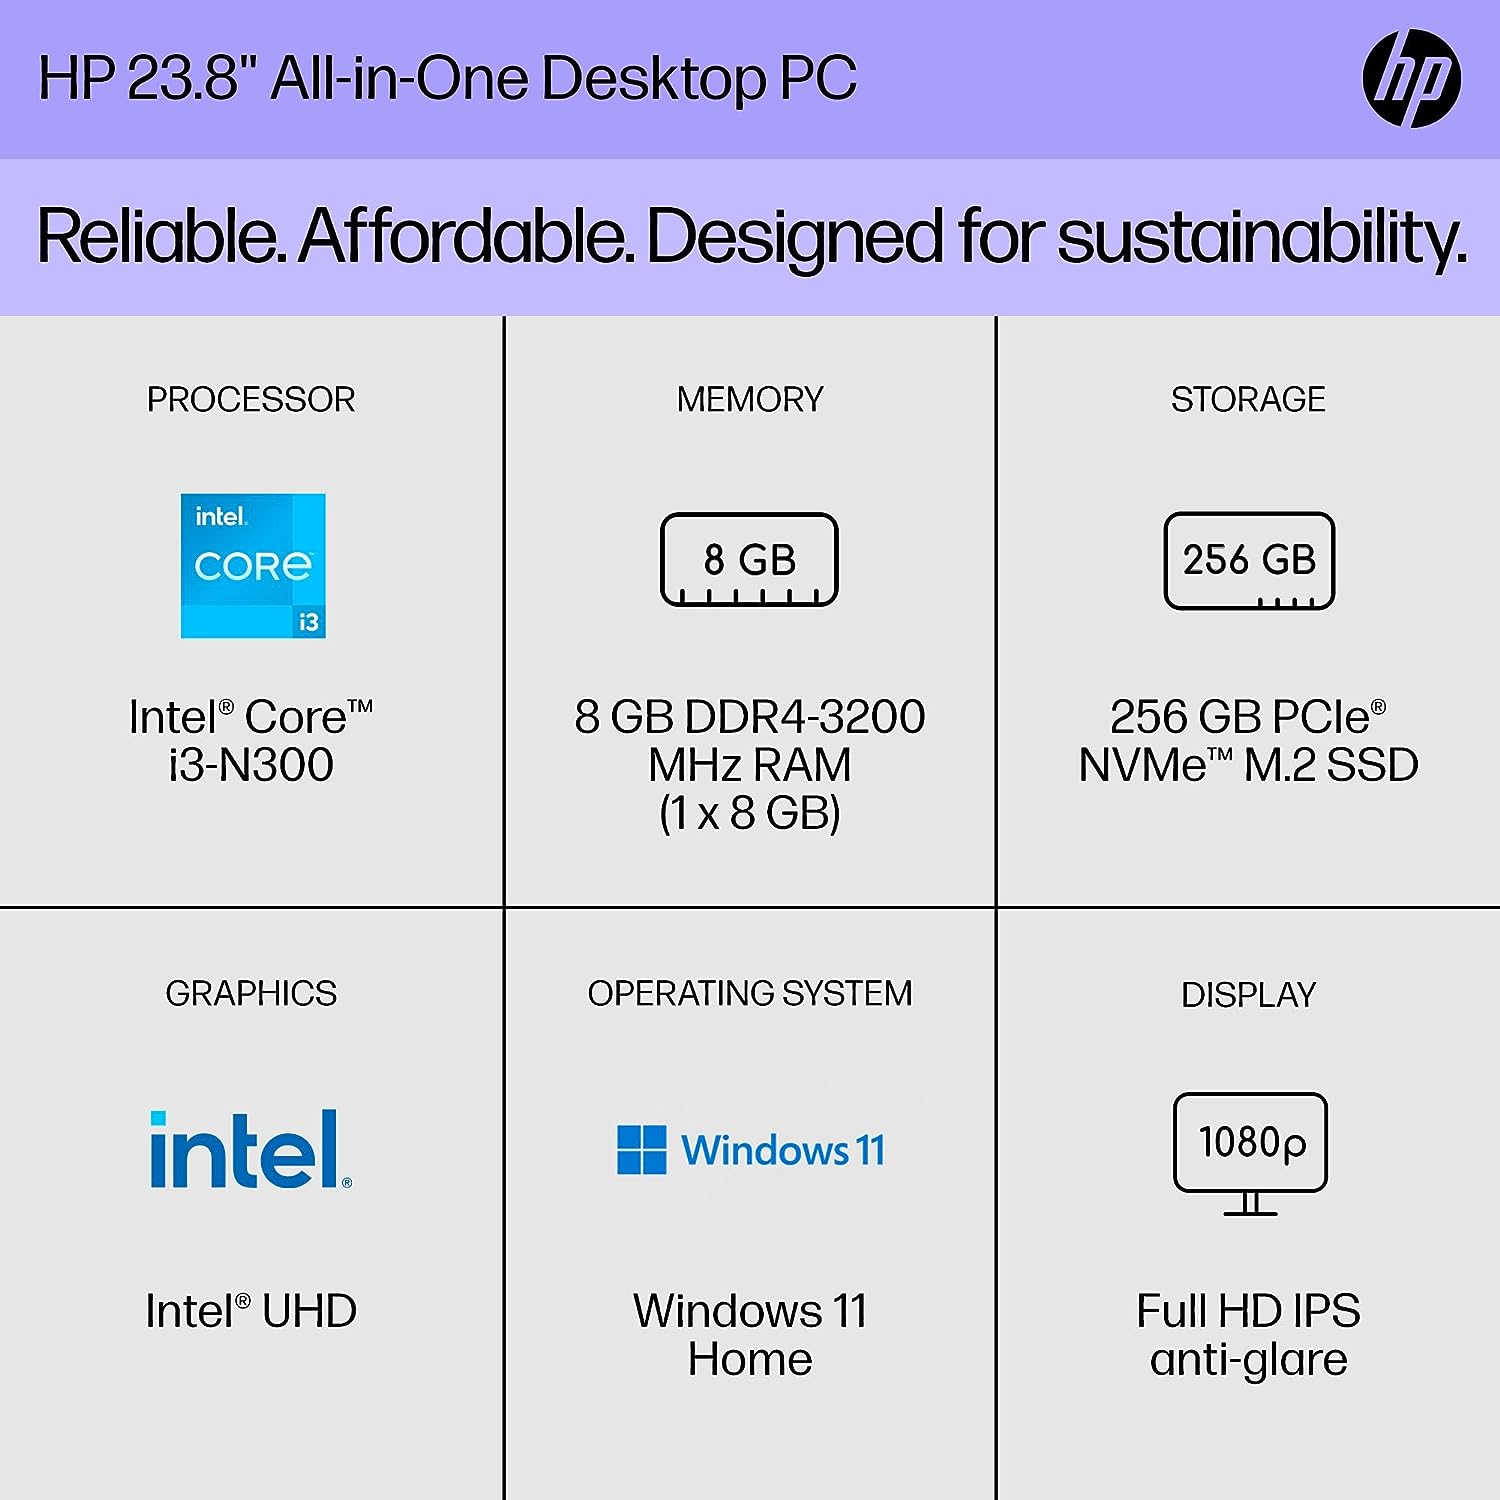 HP 23.8” All-in-One Desktop PC Review